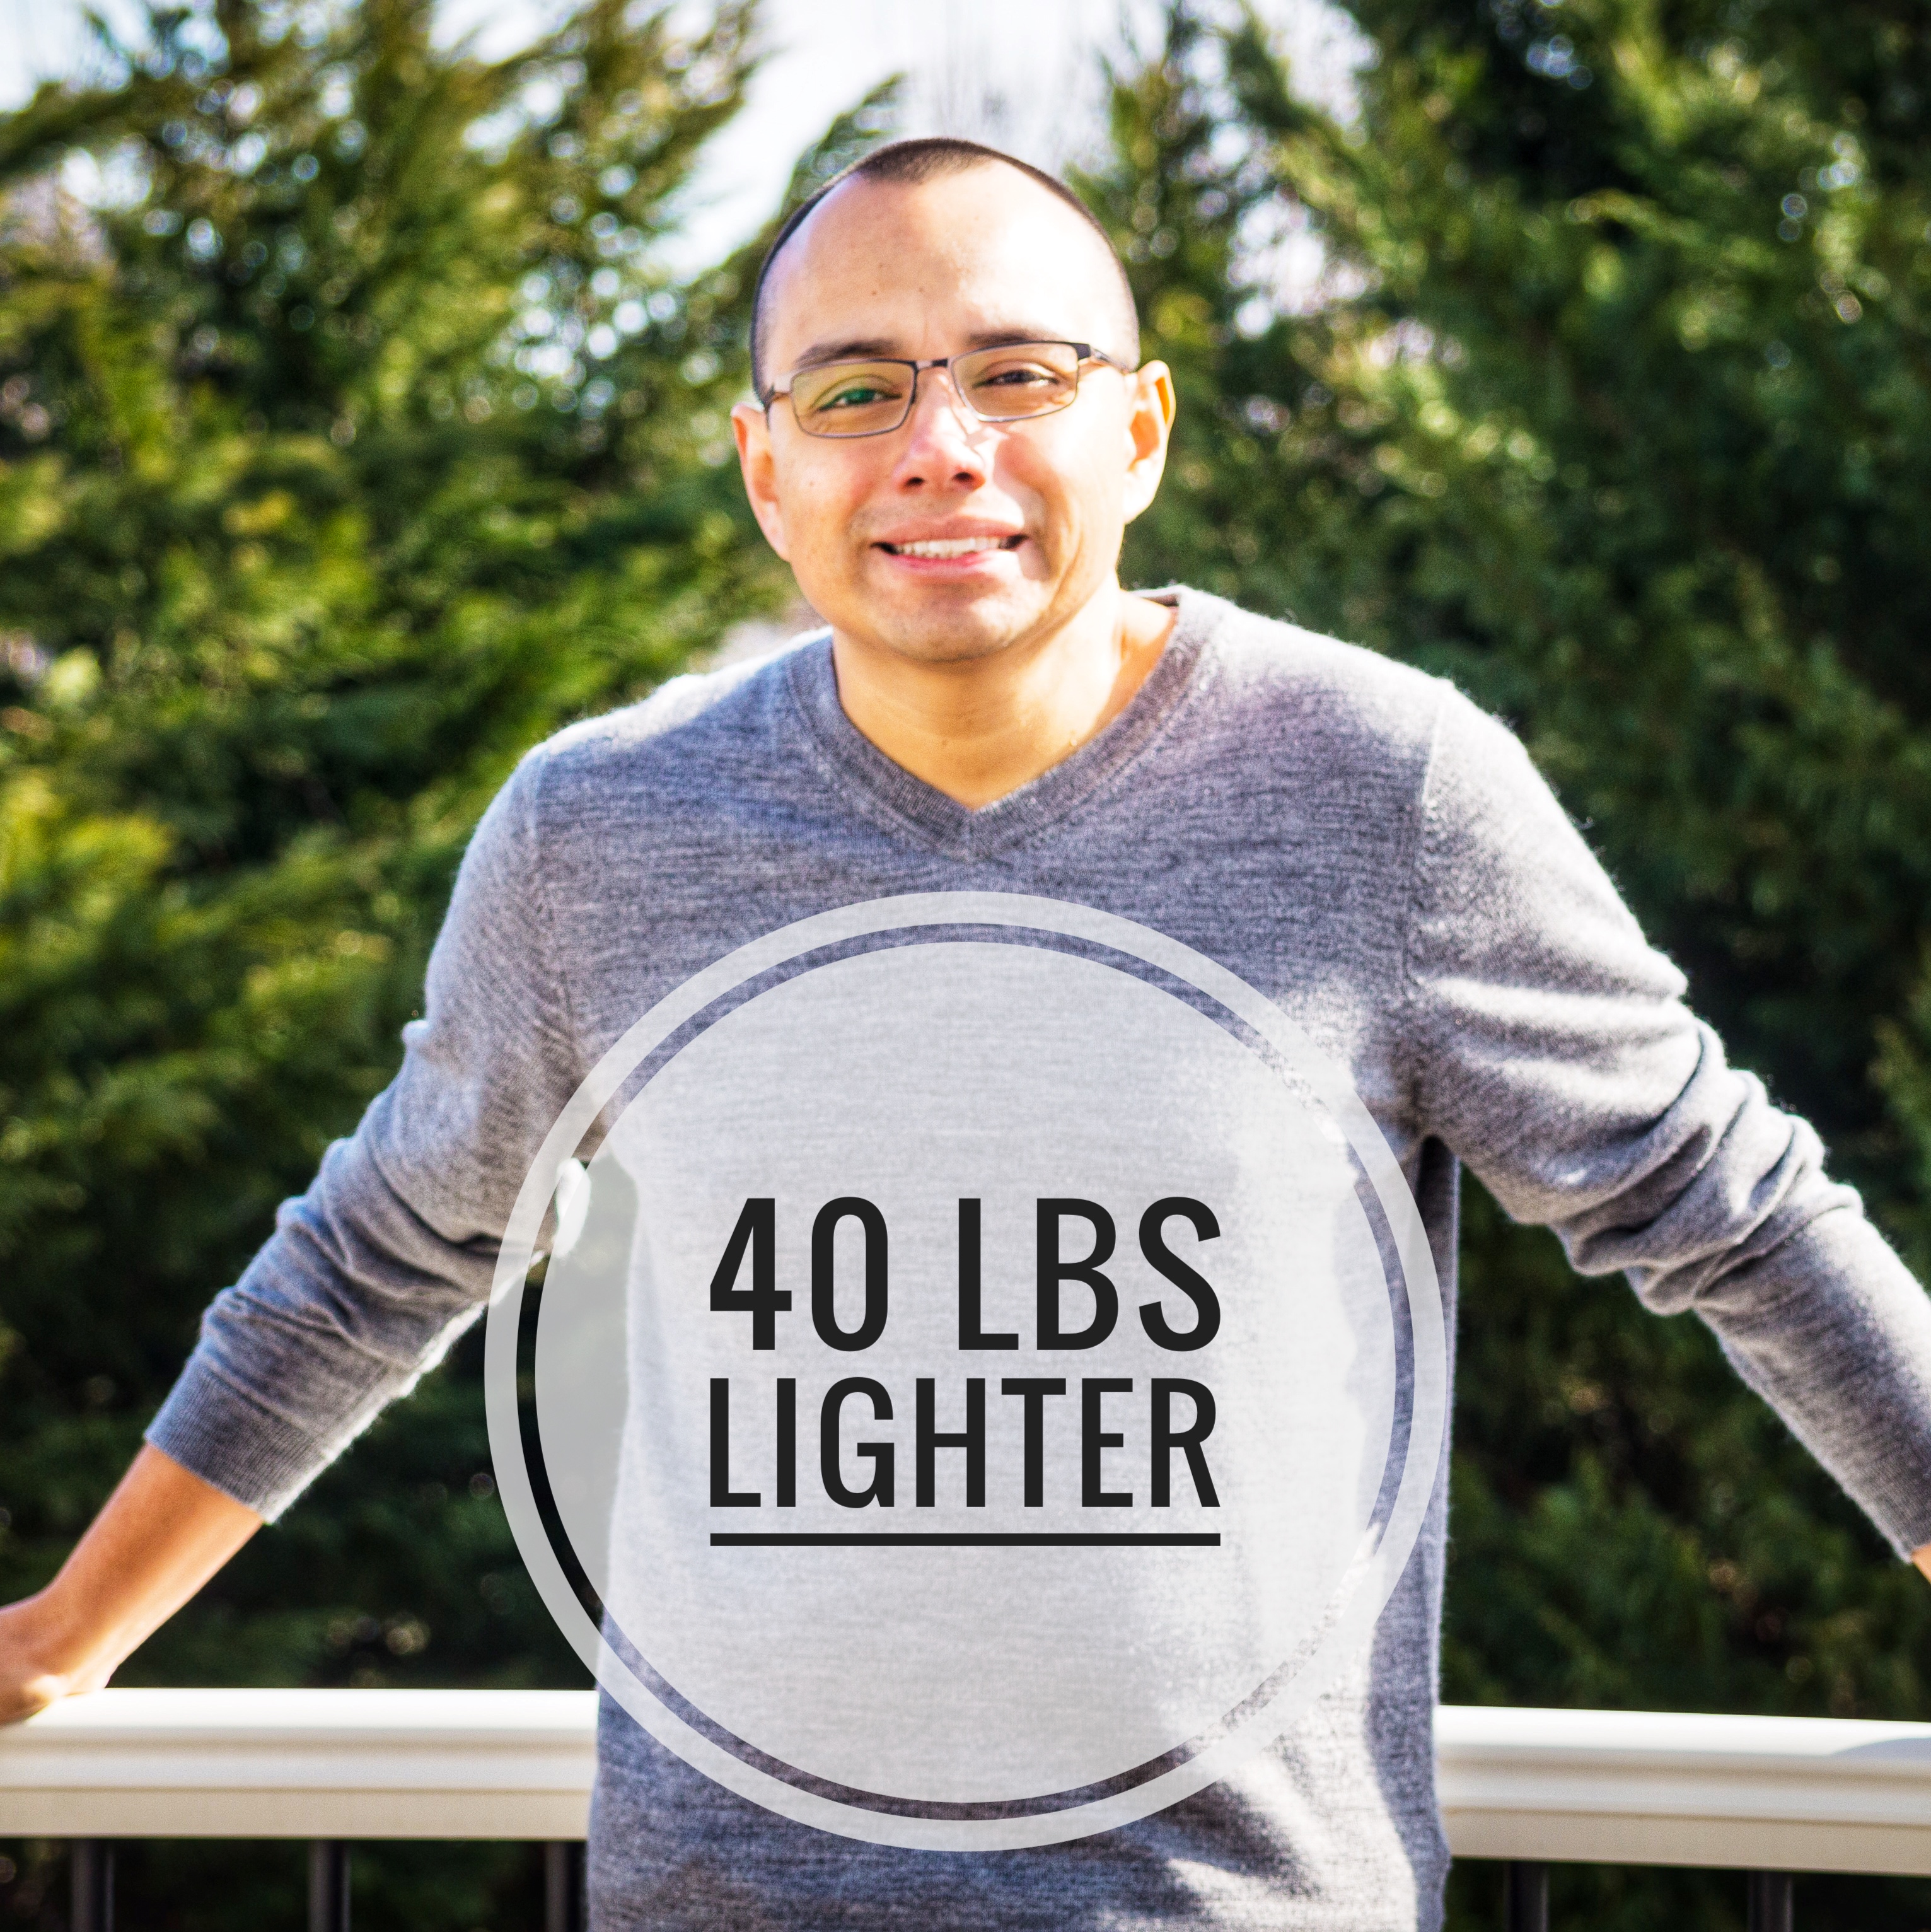 Picture of Carlos with the caption "40 lbs lighter"